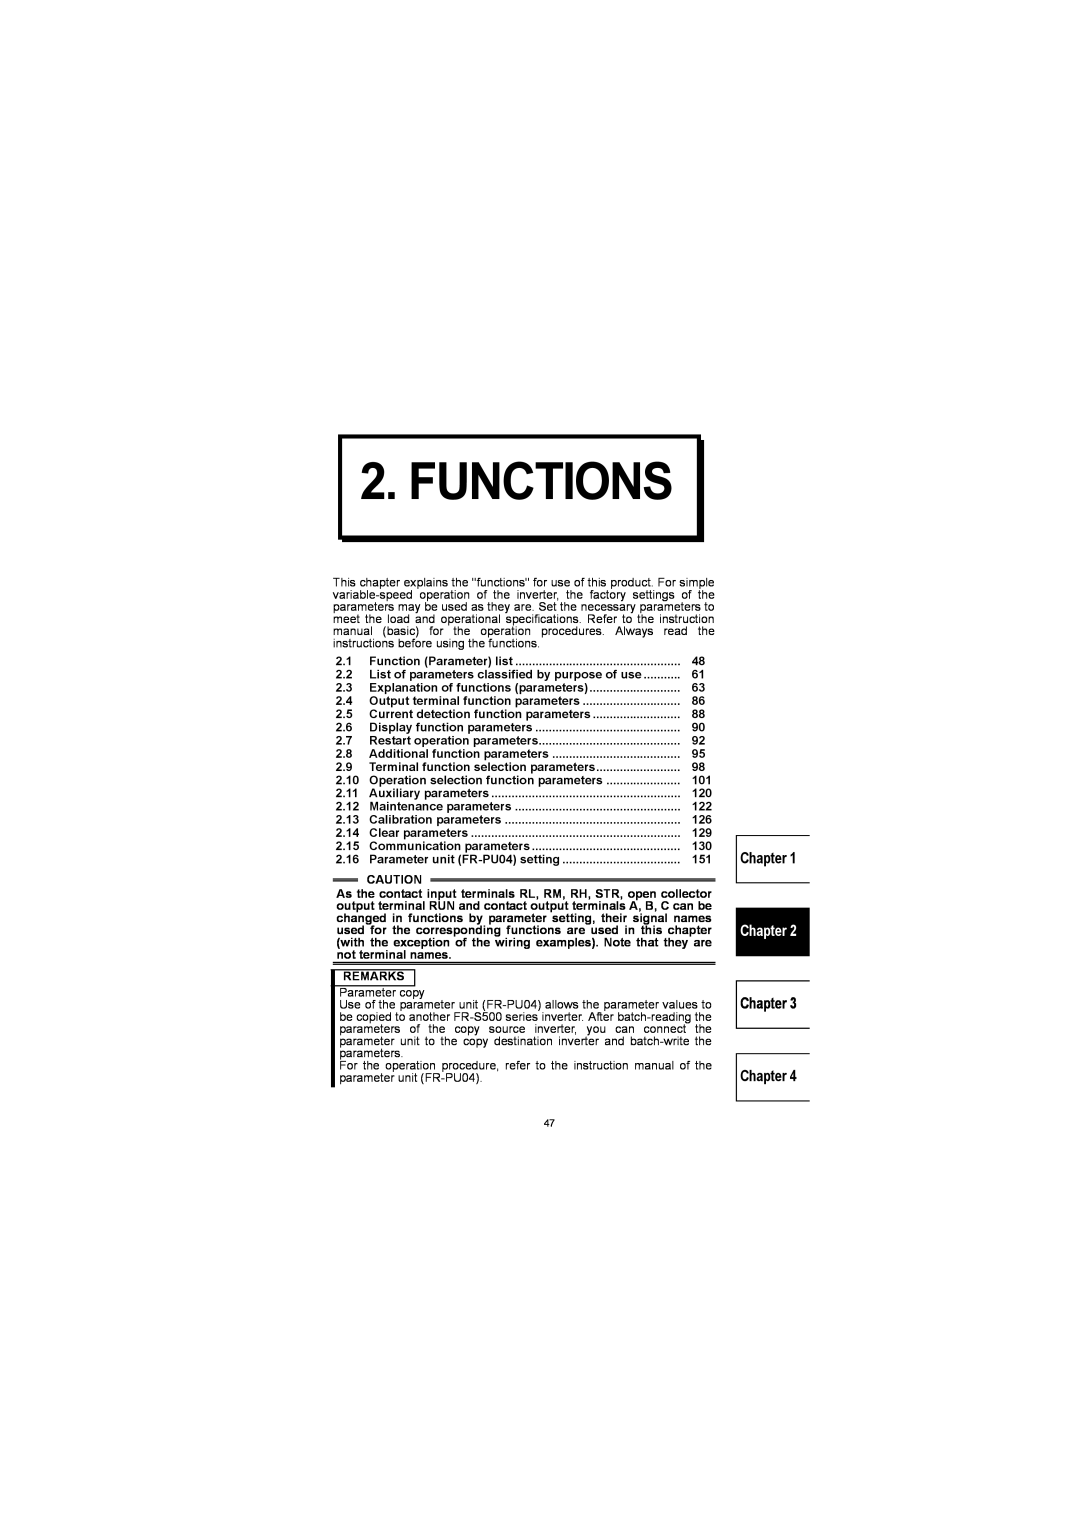 Mitsubishi Electronics FR-S500 instruction manual Functions, Chapter Chapter 